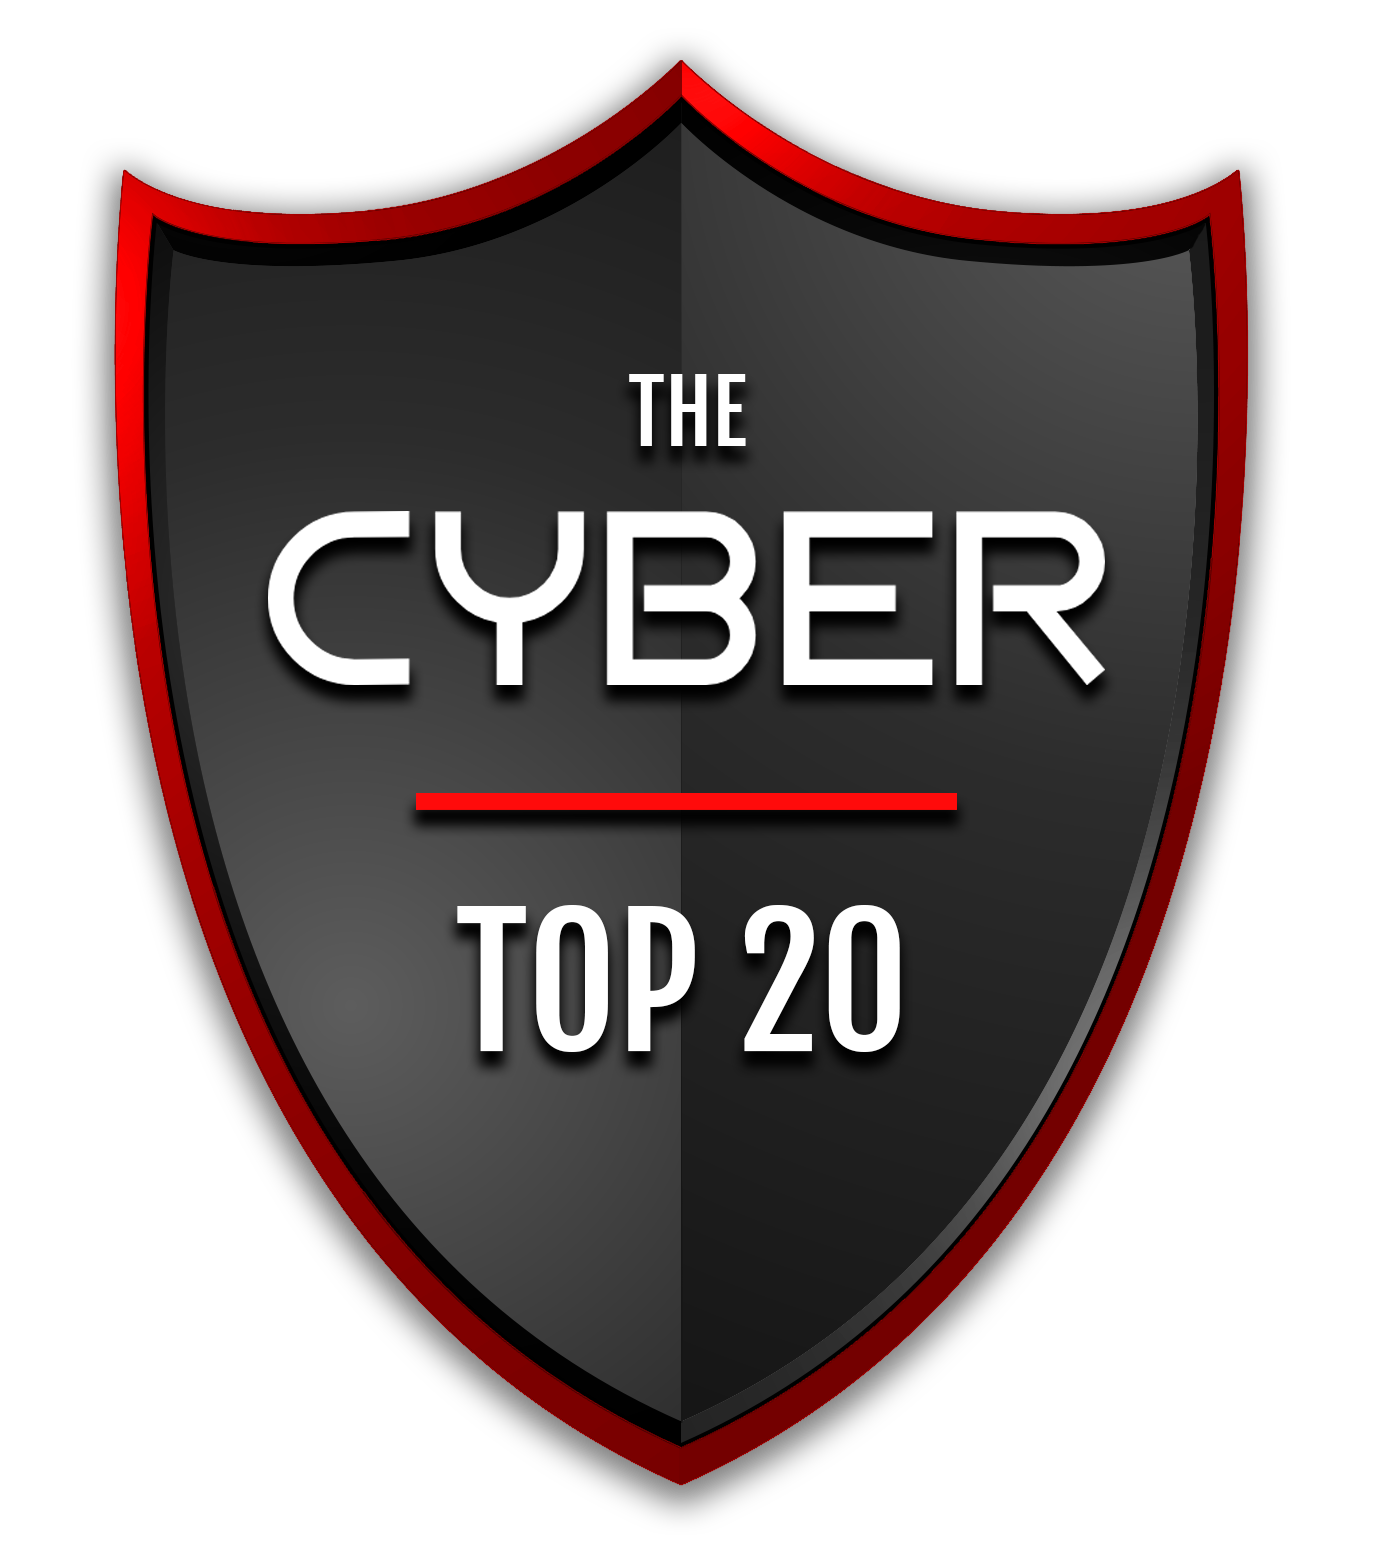 Contrast Security Named Enterprise Security Tech Cyber Top 20 Company